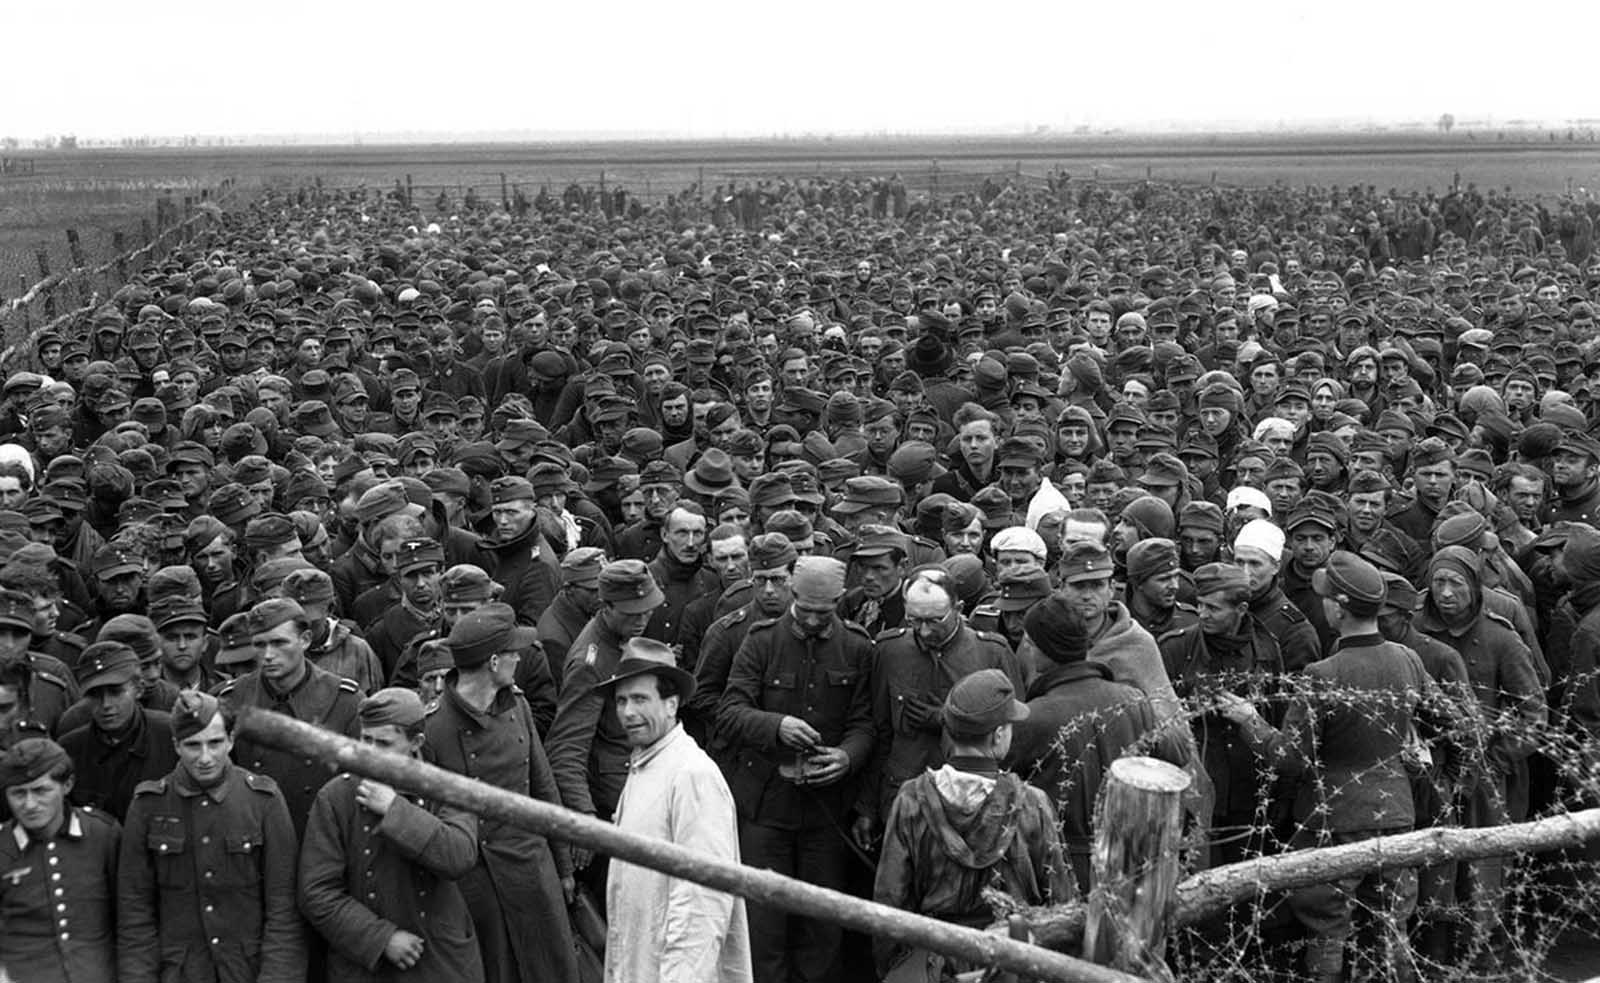 Compounds erected by the Allies for their collections of prisoners never seem to be big enough, here is an over-crowded cage of Germans rounded up by the Seventh Army during its drive to Heidelberg, on April 4, 1945.